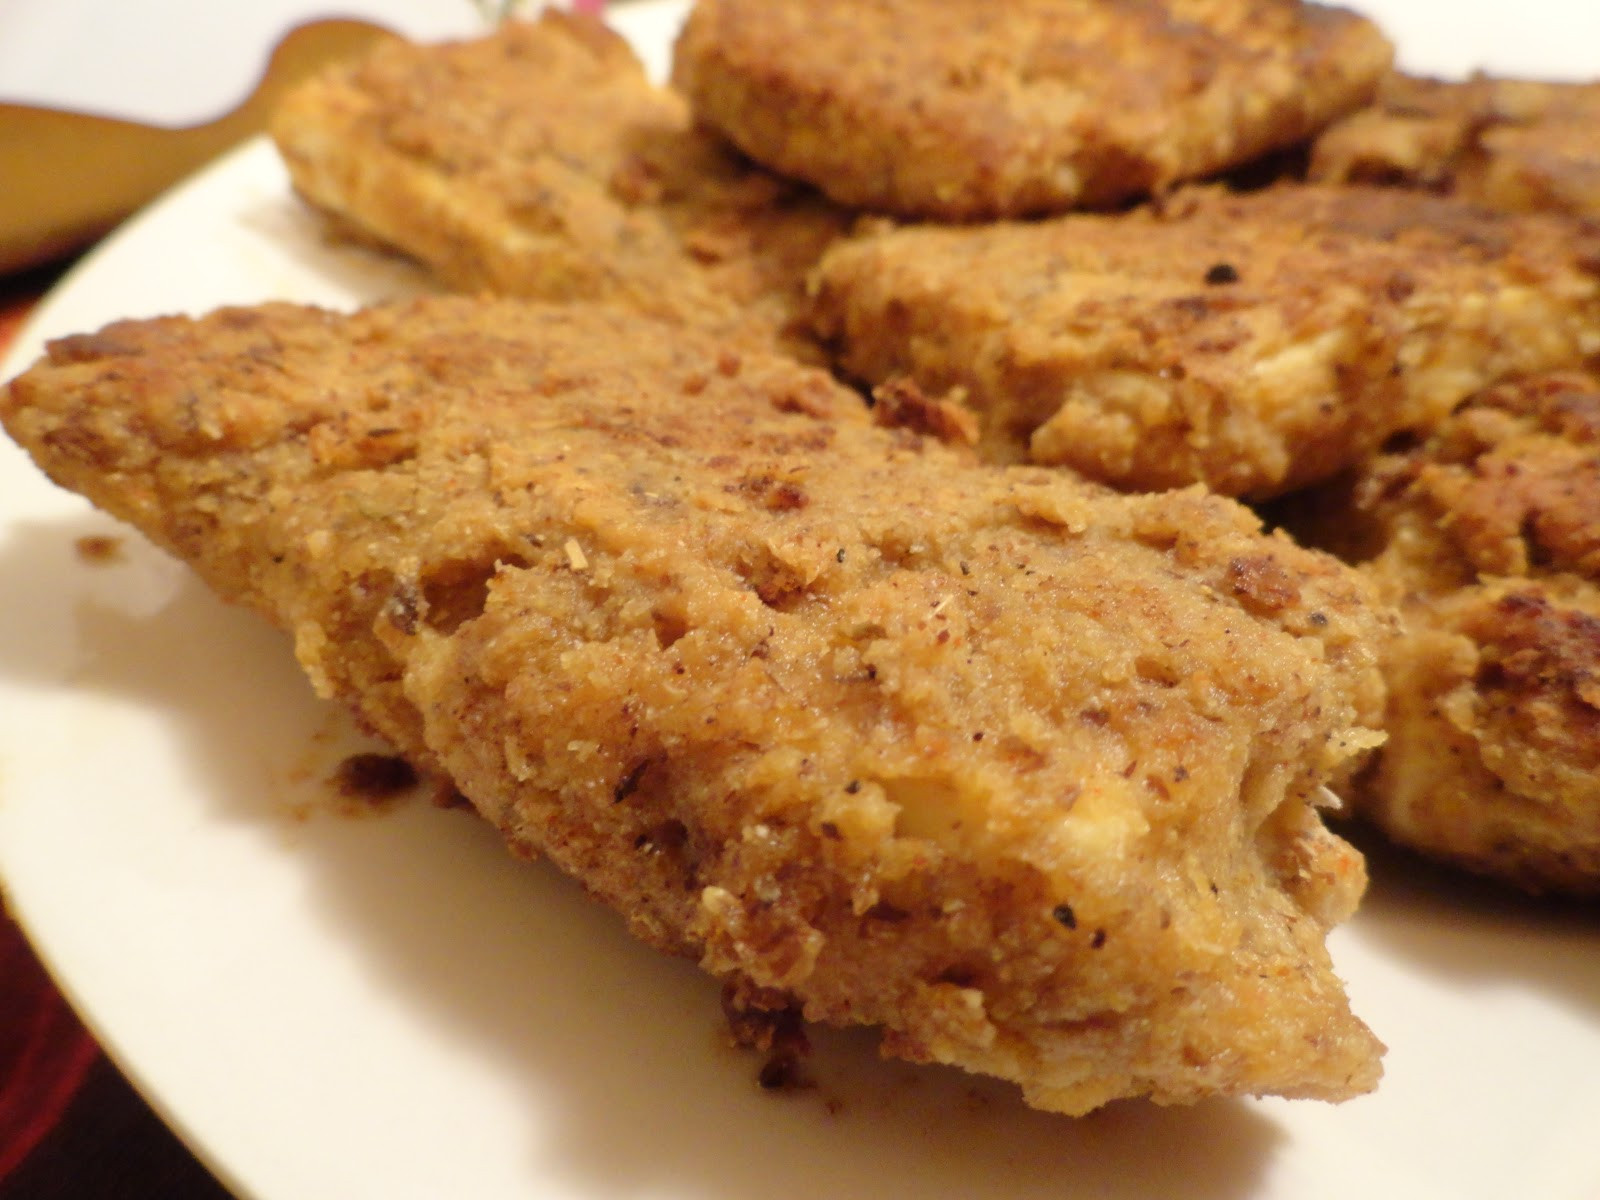 Chicken Tofu Recipes
 VeganMoFo The Pioneer Woman and "Chicken Fried" Tofu